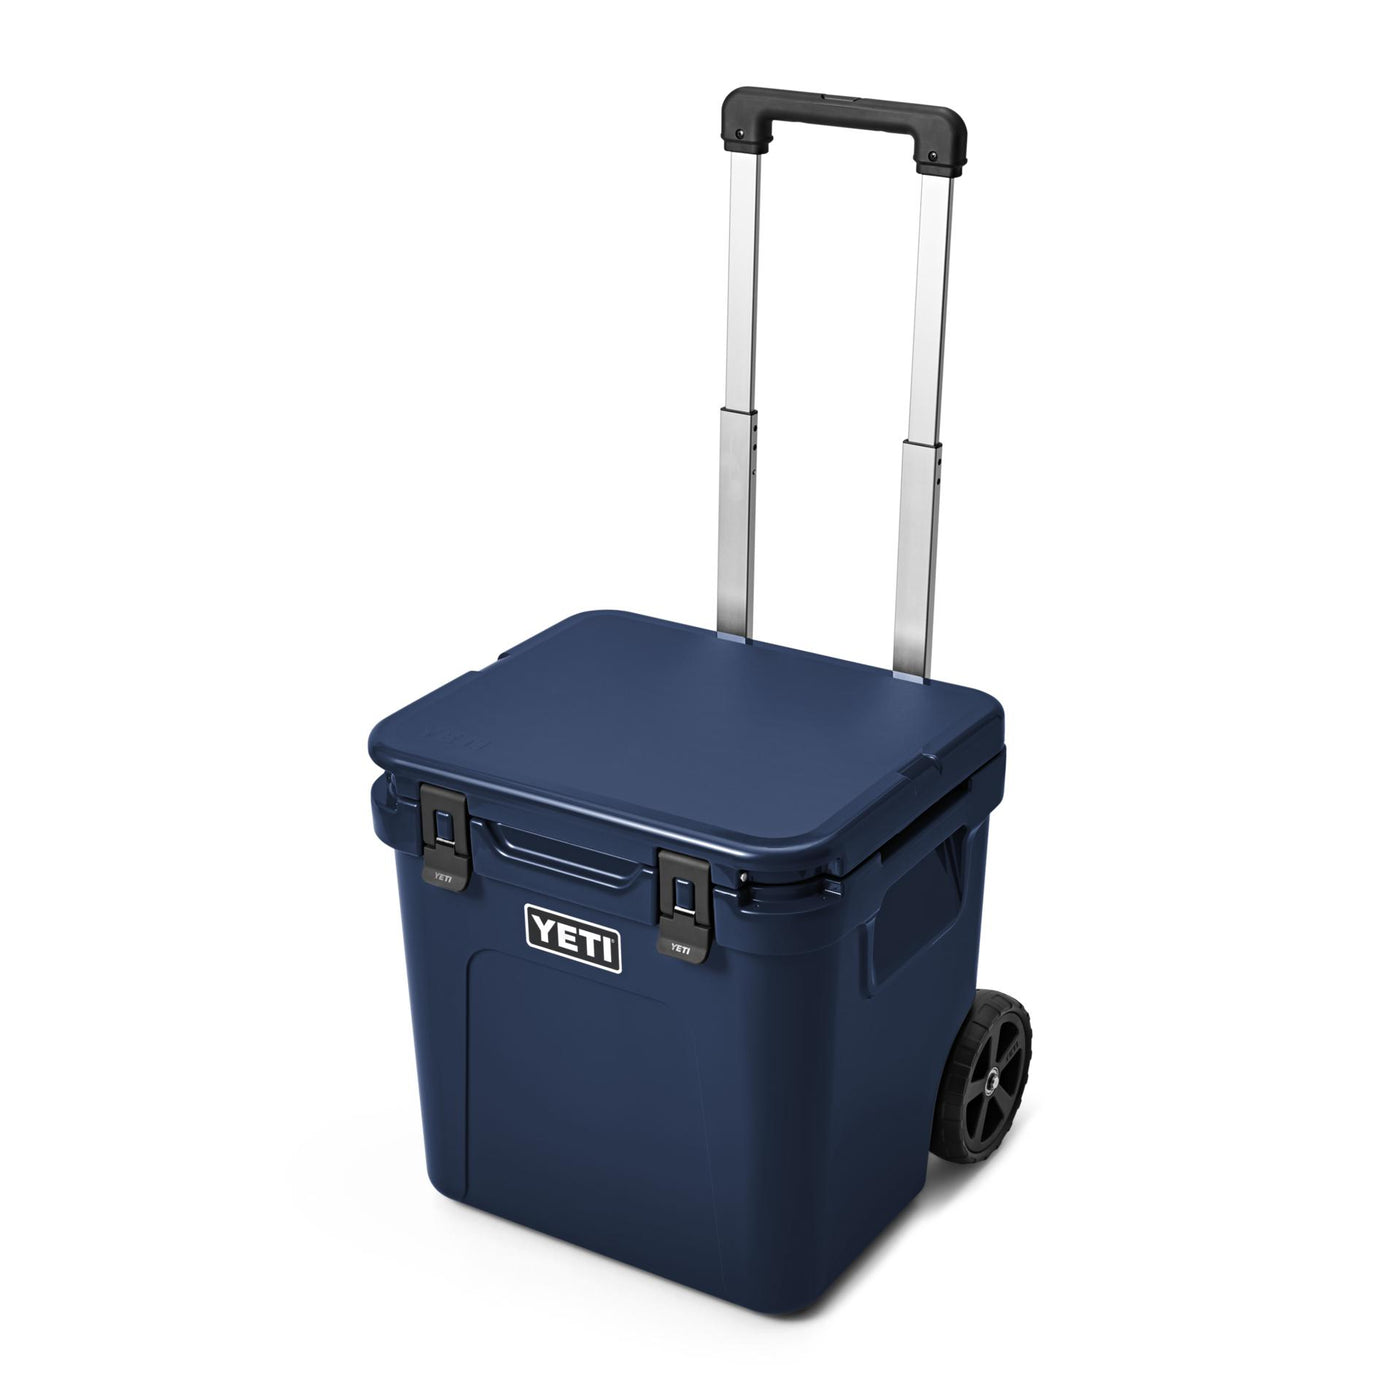 Yeti Roadie 48 Wheeled Cooler-Hunting/Outdoors-Navy-Kevin's Fine Outdoor Gear & Apparel